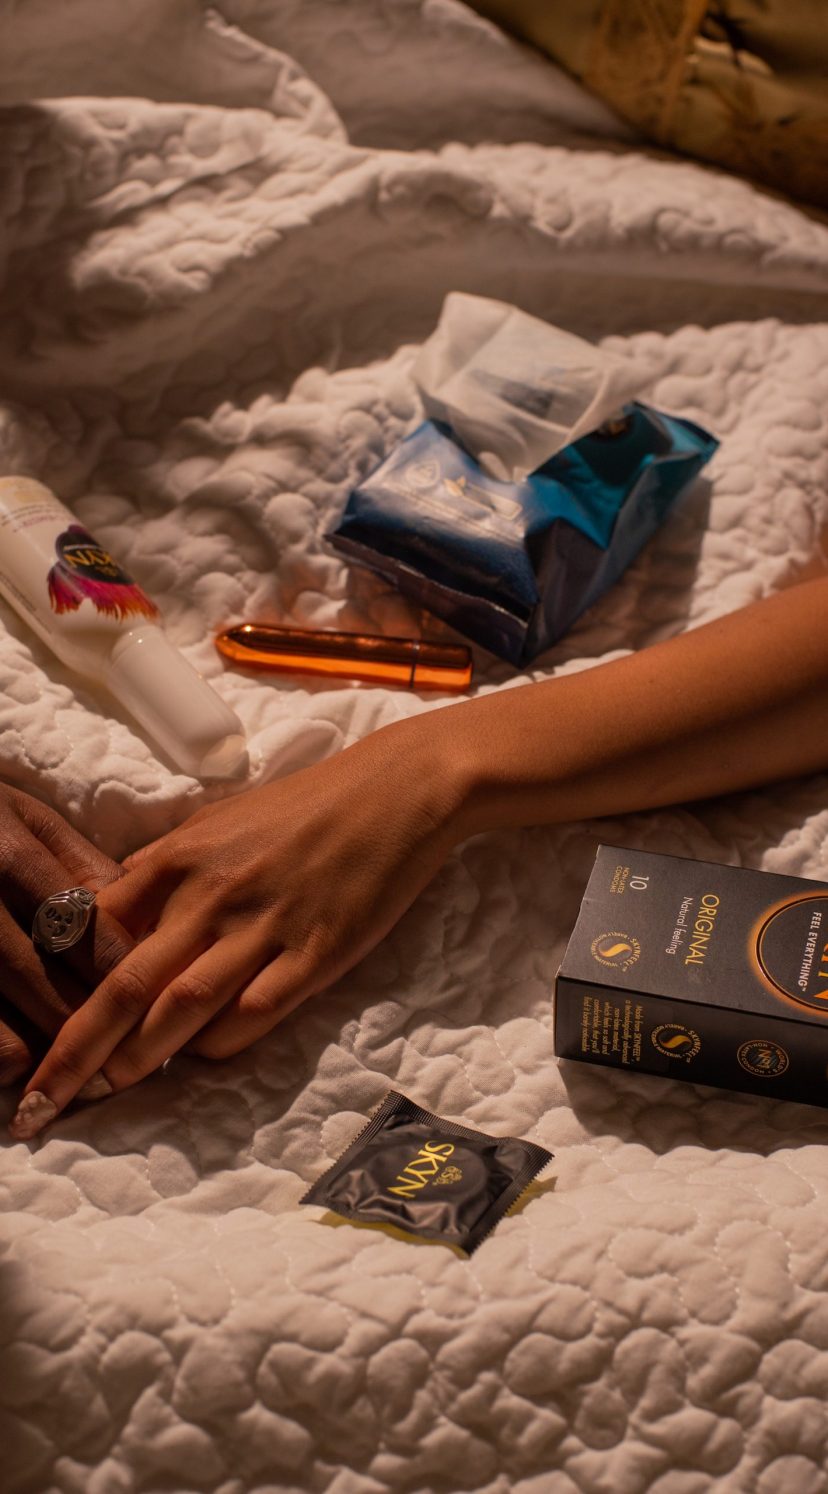 Man hand holding woman hand with SKYN products lying around on a bed